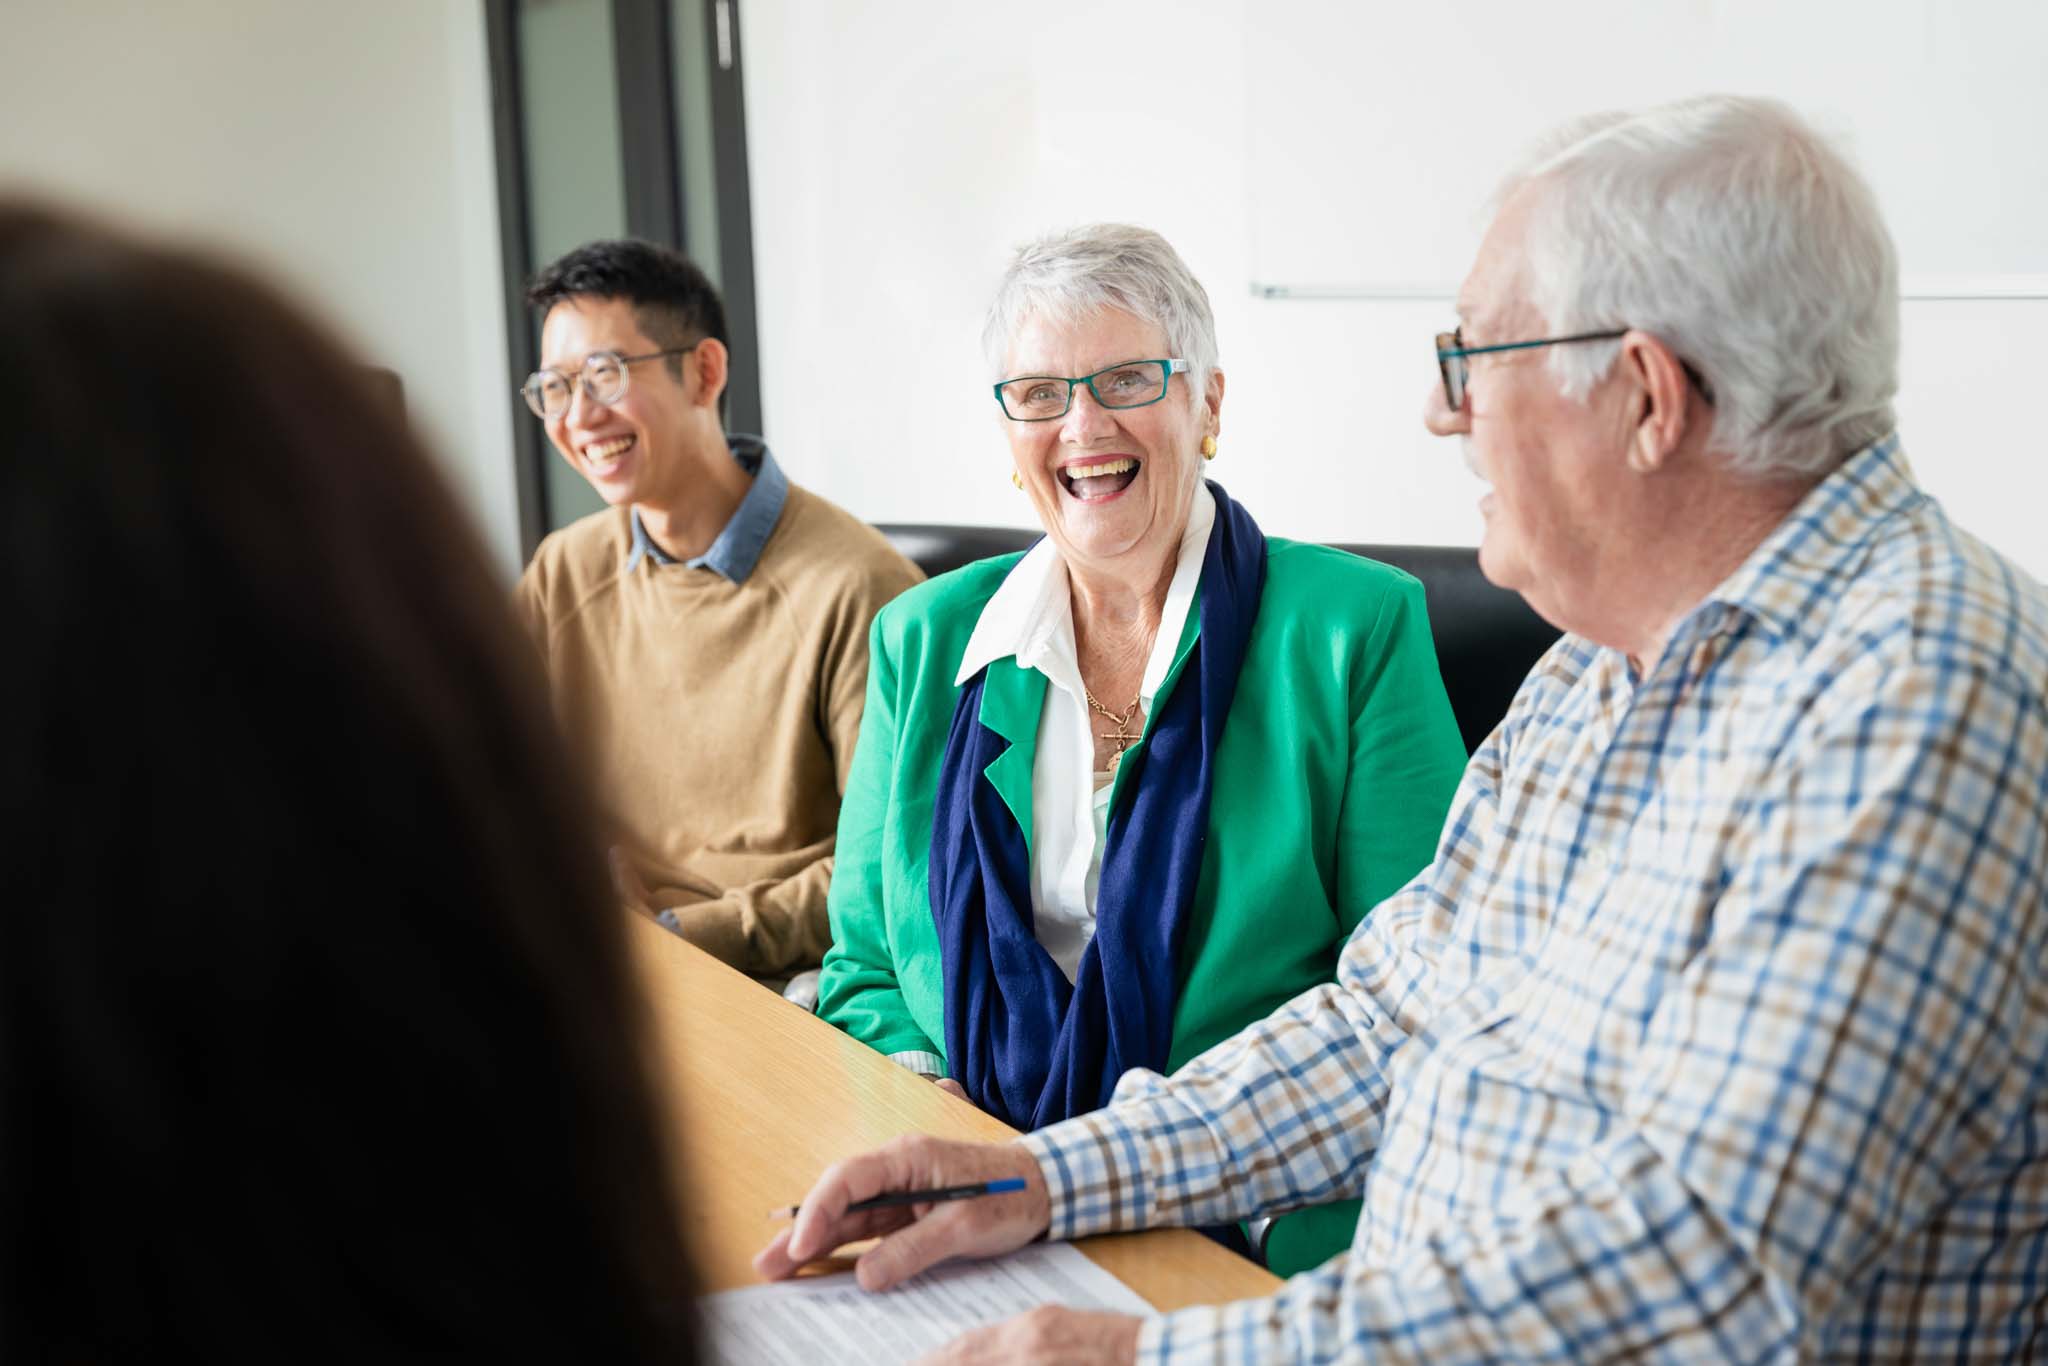 Picture of elderly people in a meeting room smiling